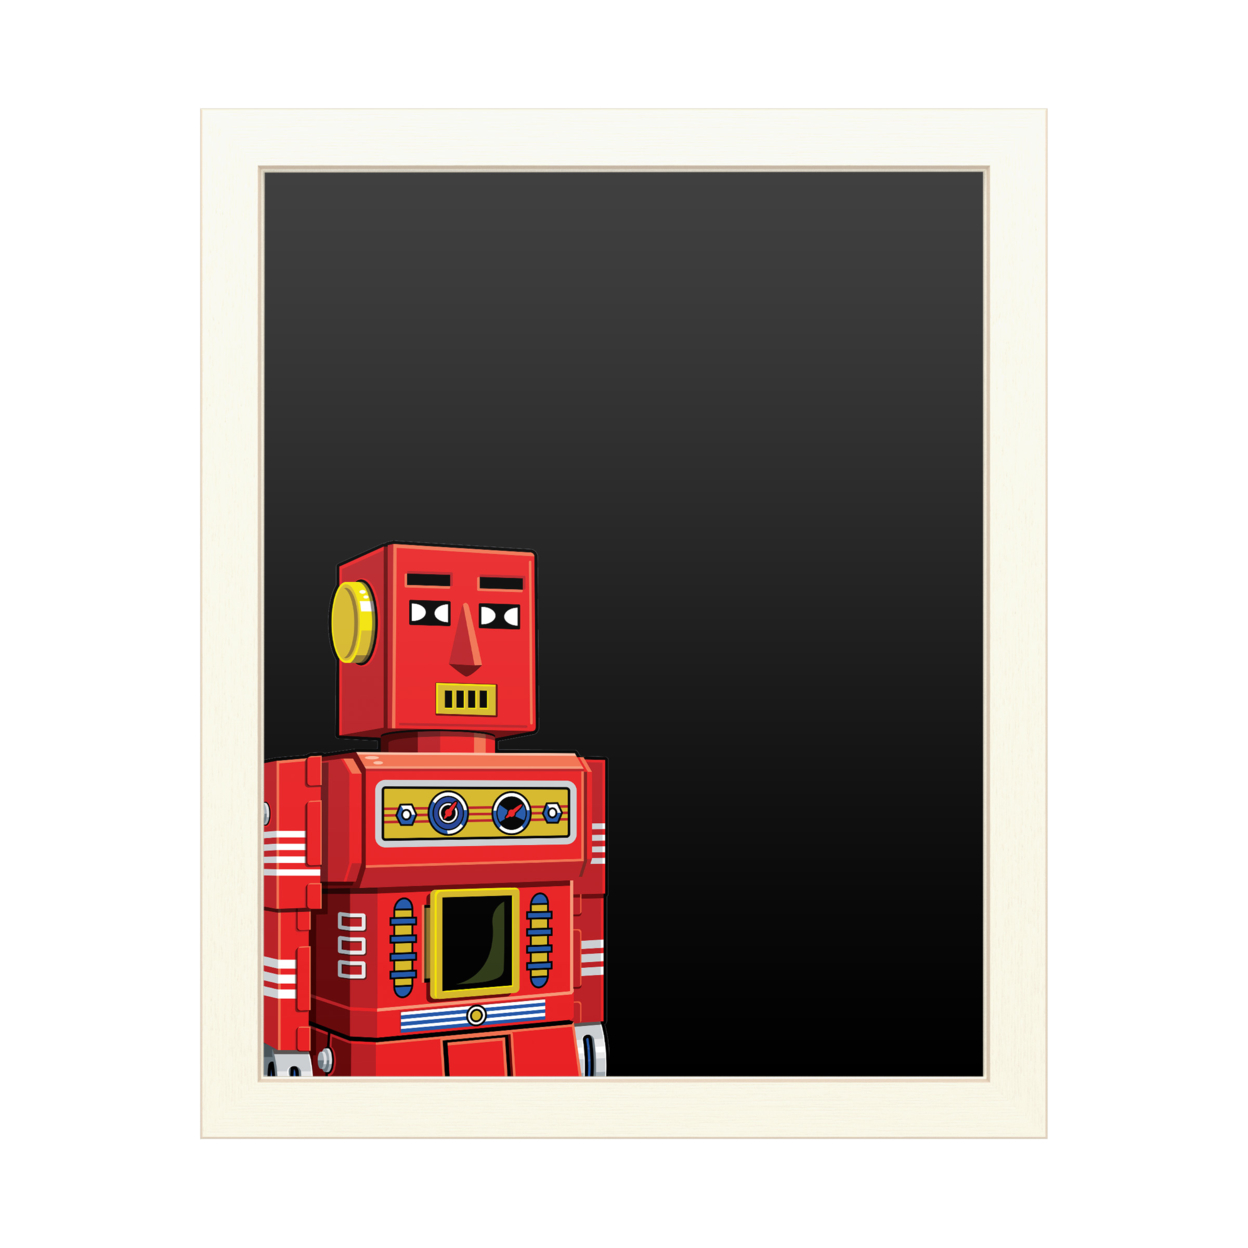 16 X 20 Chalk Board With Printed Artwork - Ron Magnes Vintage Red Robot White Board - Ready To Hang Chalkboard